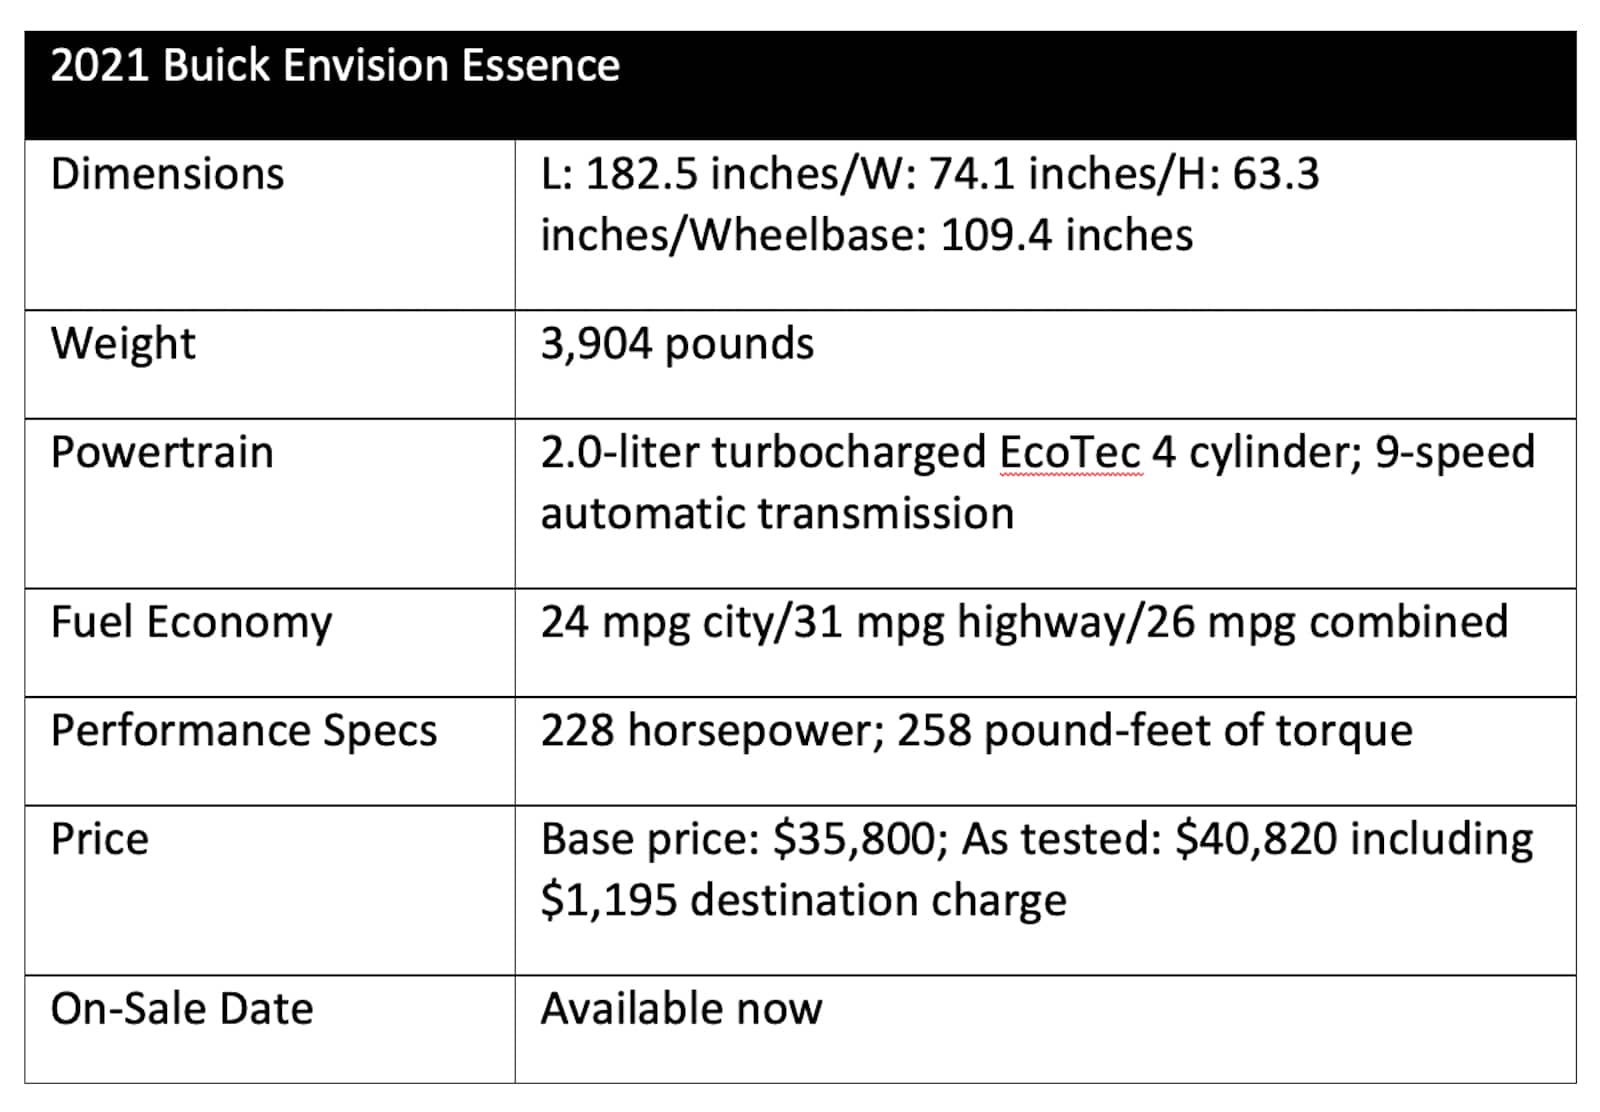 2021 Buick Envision Essence chart